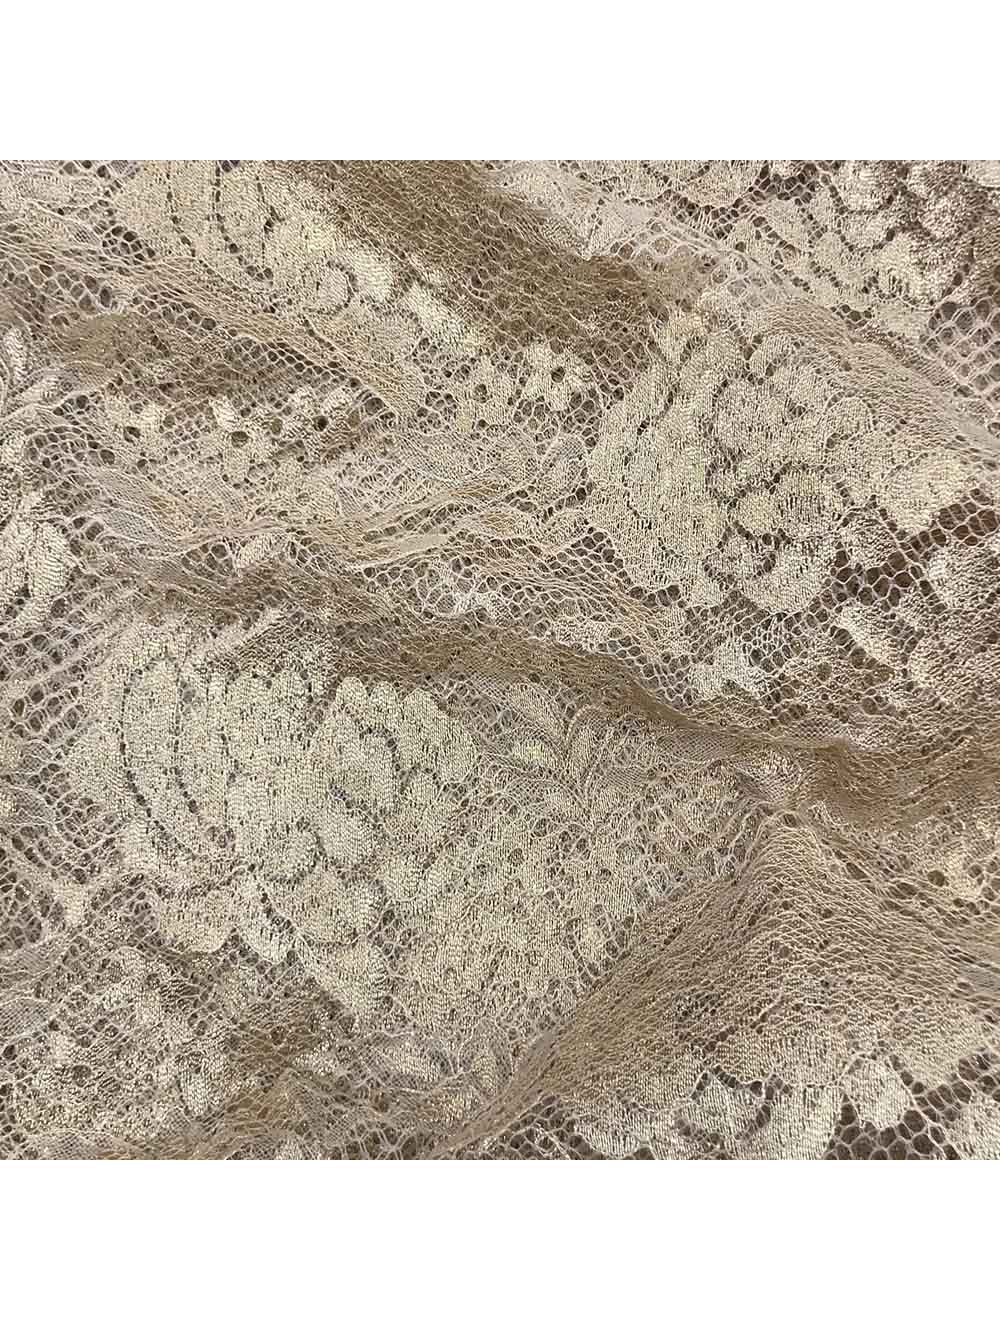 Gold Shimmer Net Chantilly Lace Fabric 54 Inches Width